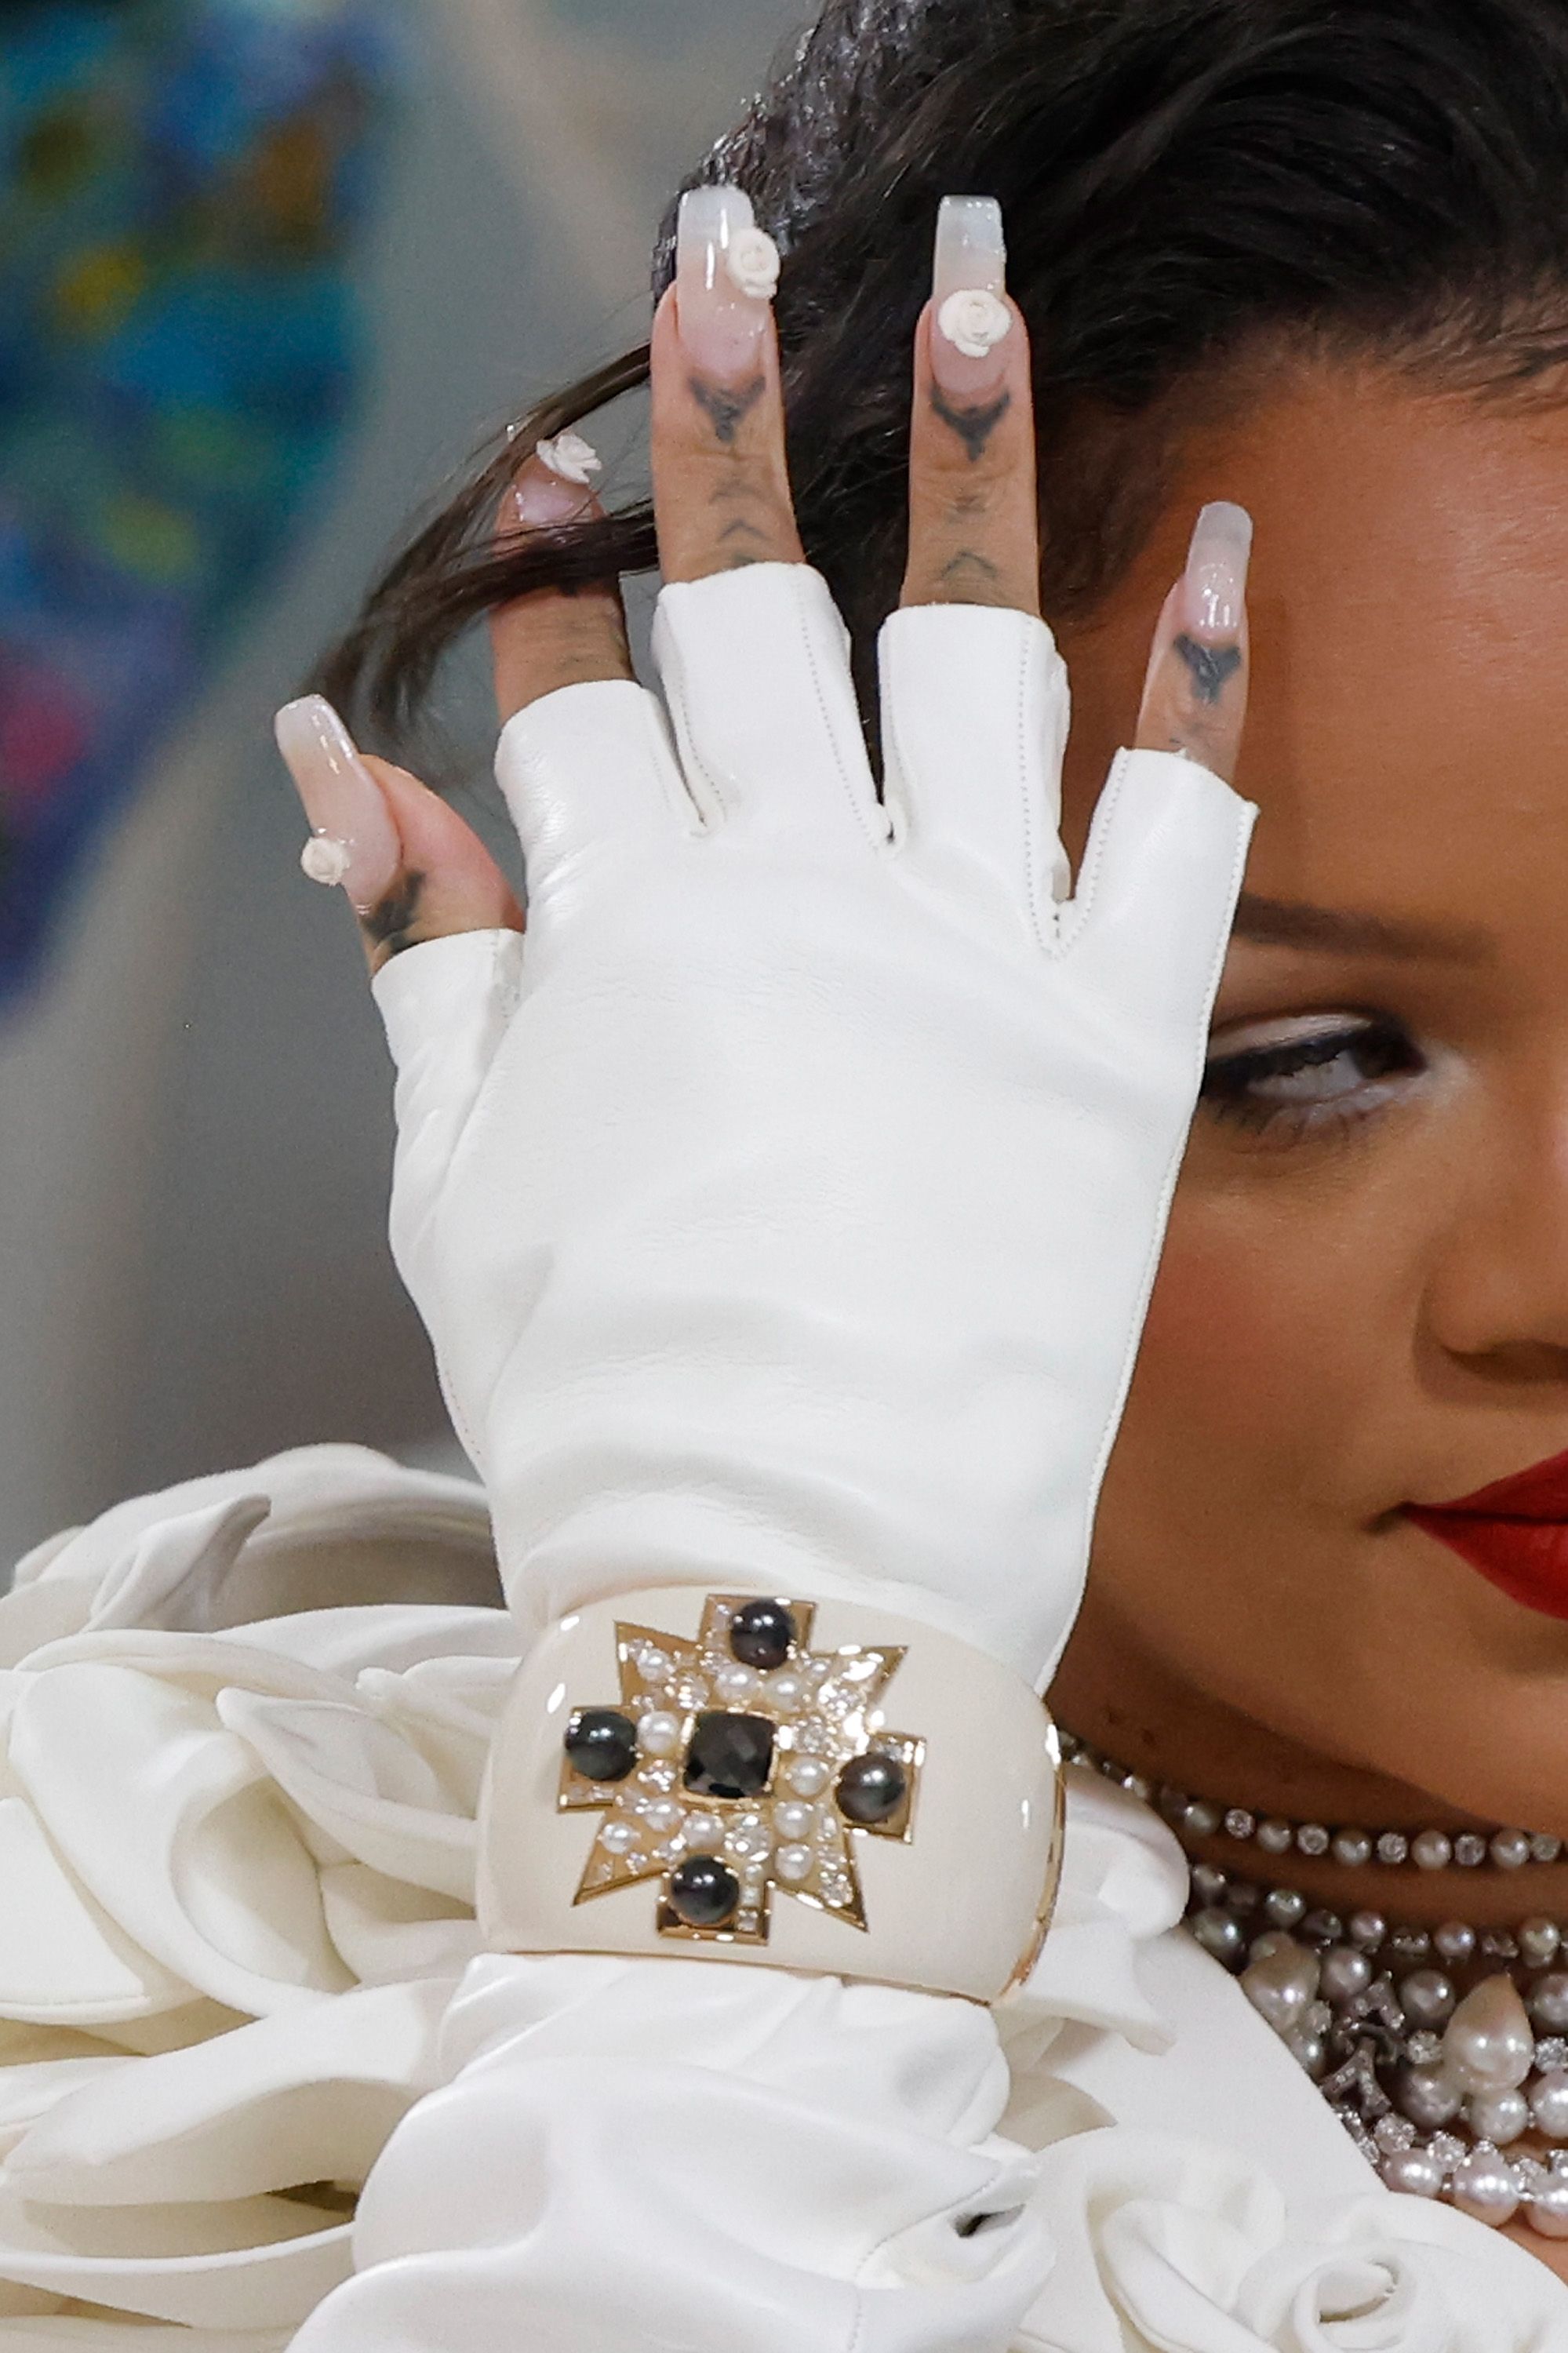 The Best Celebrity Manicures and Nail Art at the 2021 Met Gala